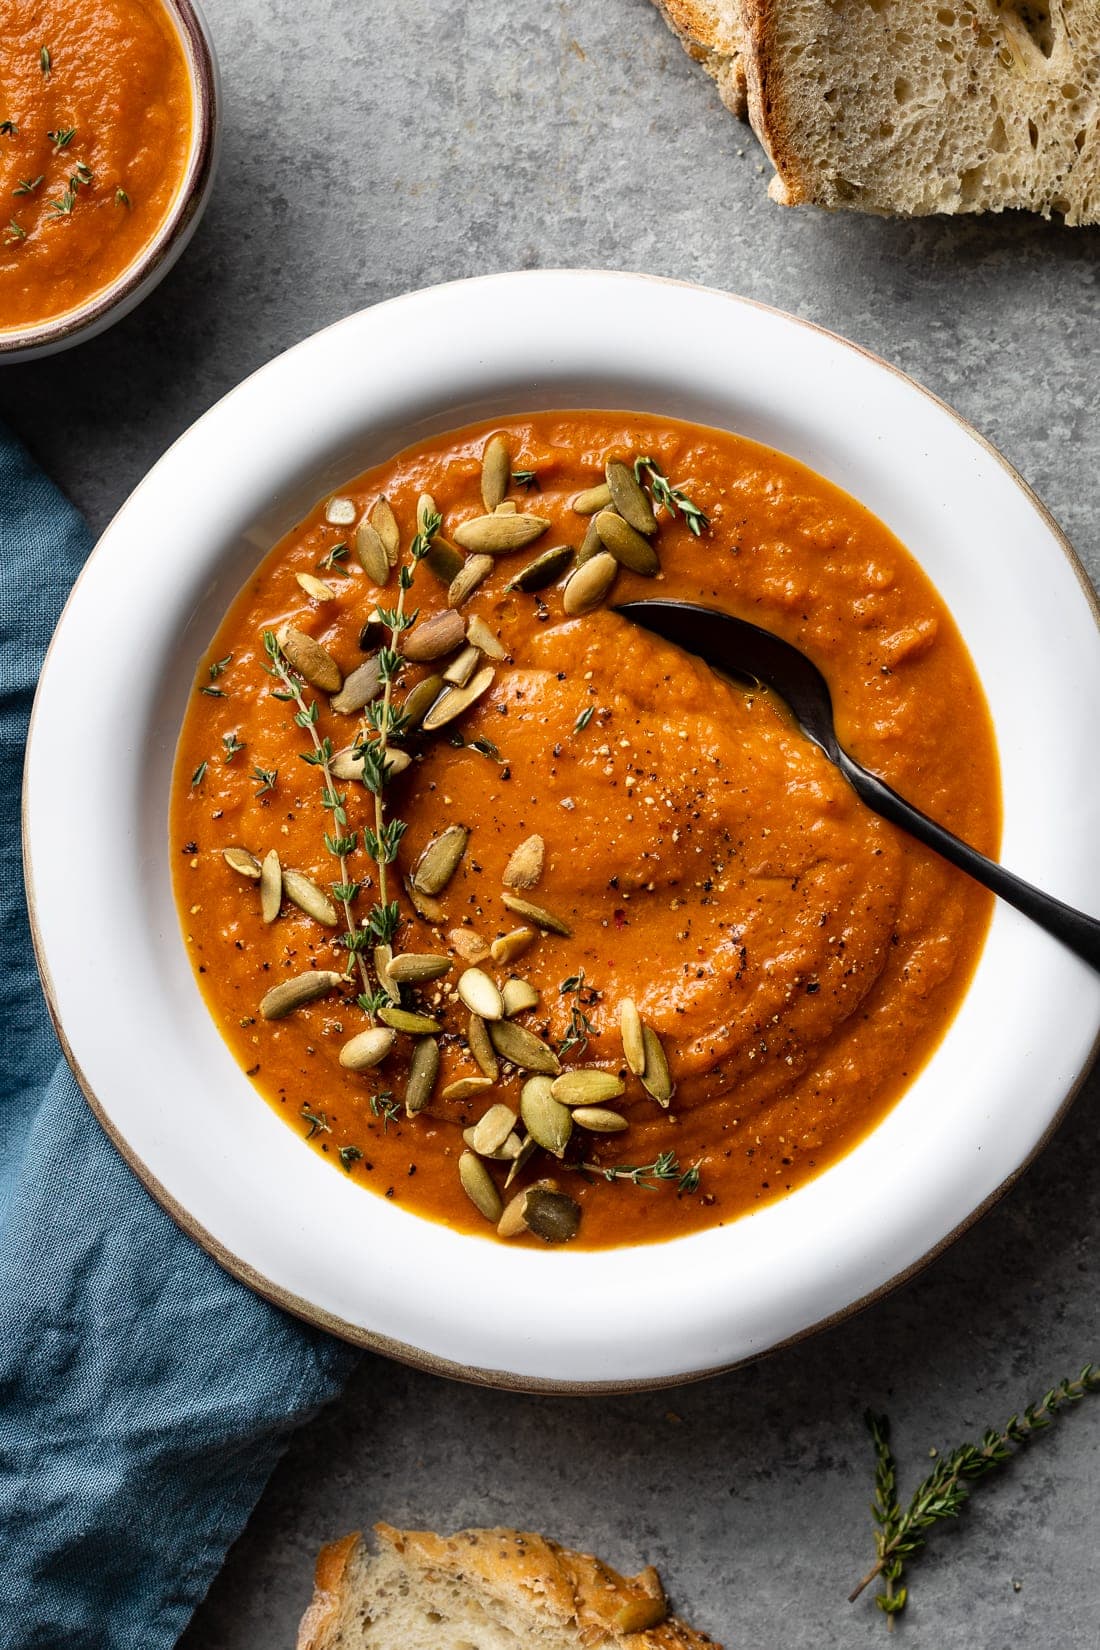 Bowl of creamy carrot red pepper soup.